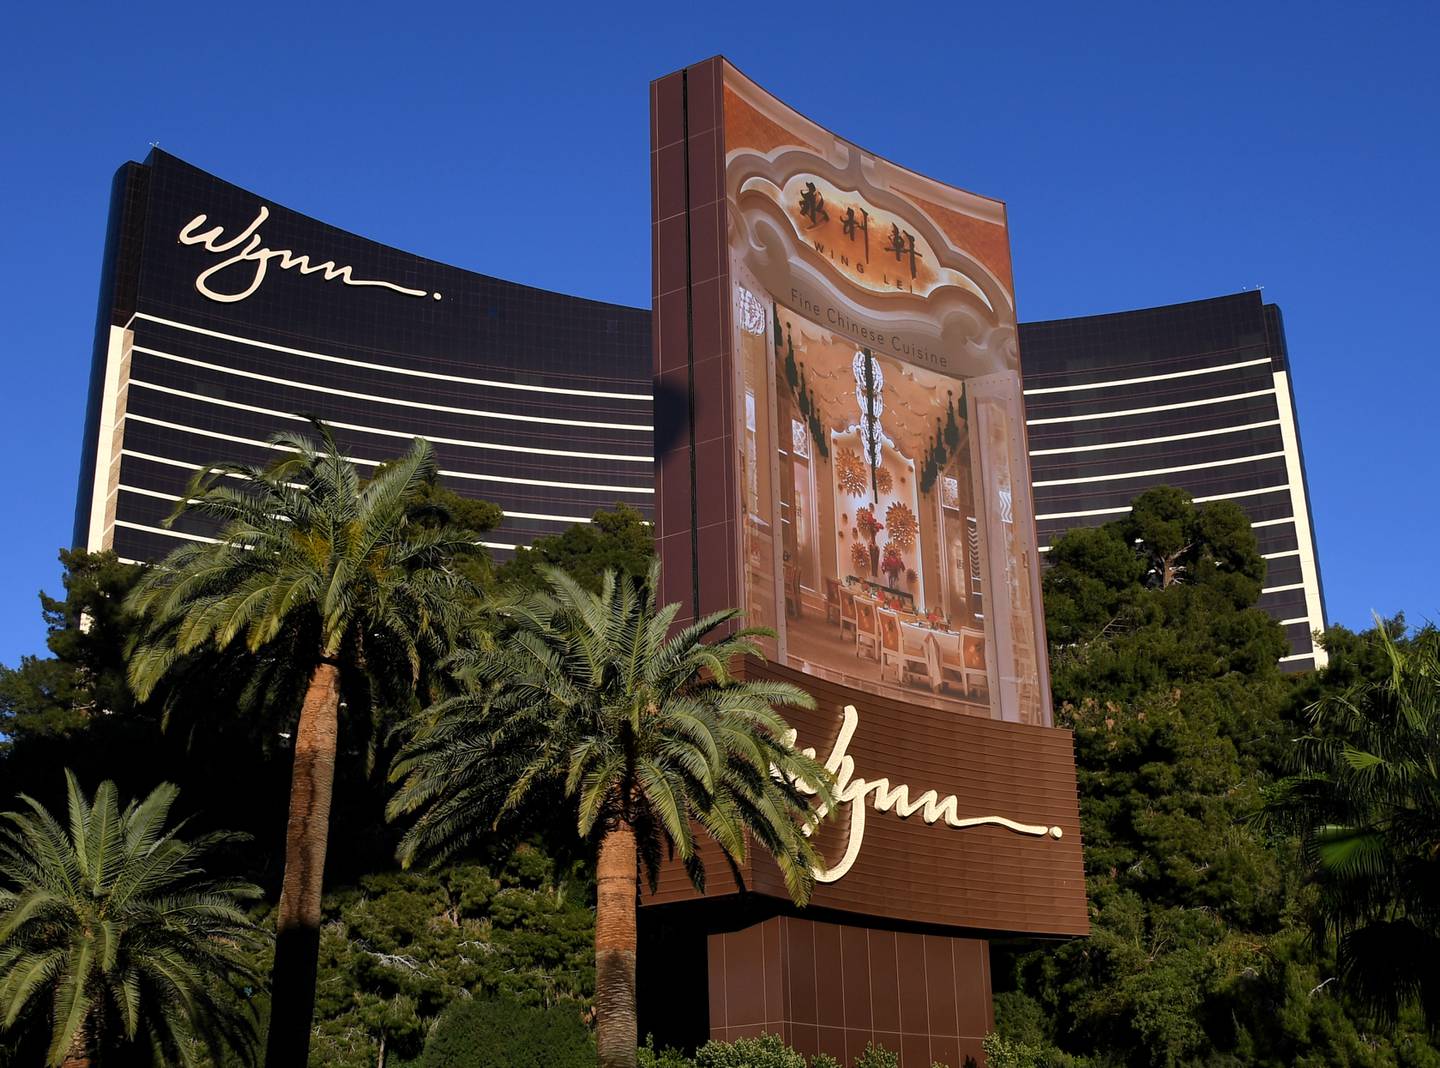 An exterior view shows Wynn Las Vegas where the annual International Council of Shopping Centers conference is being held.